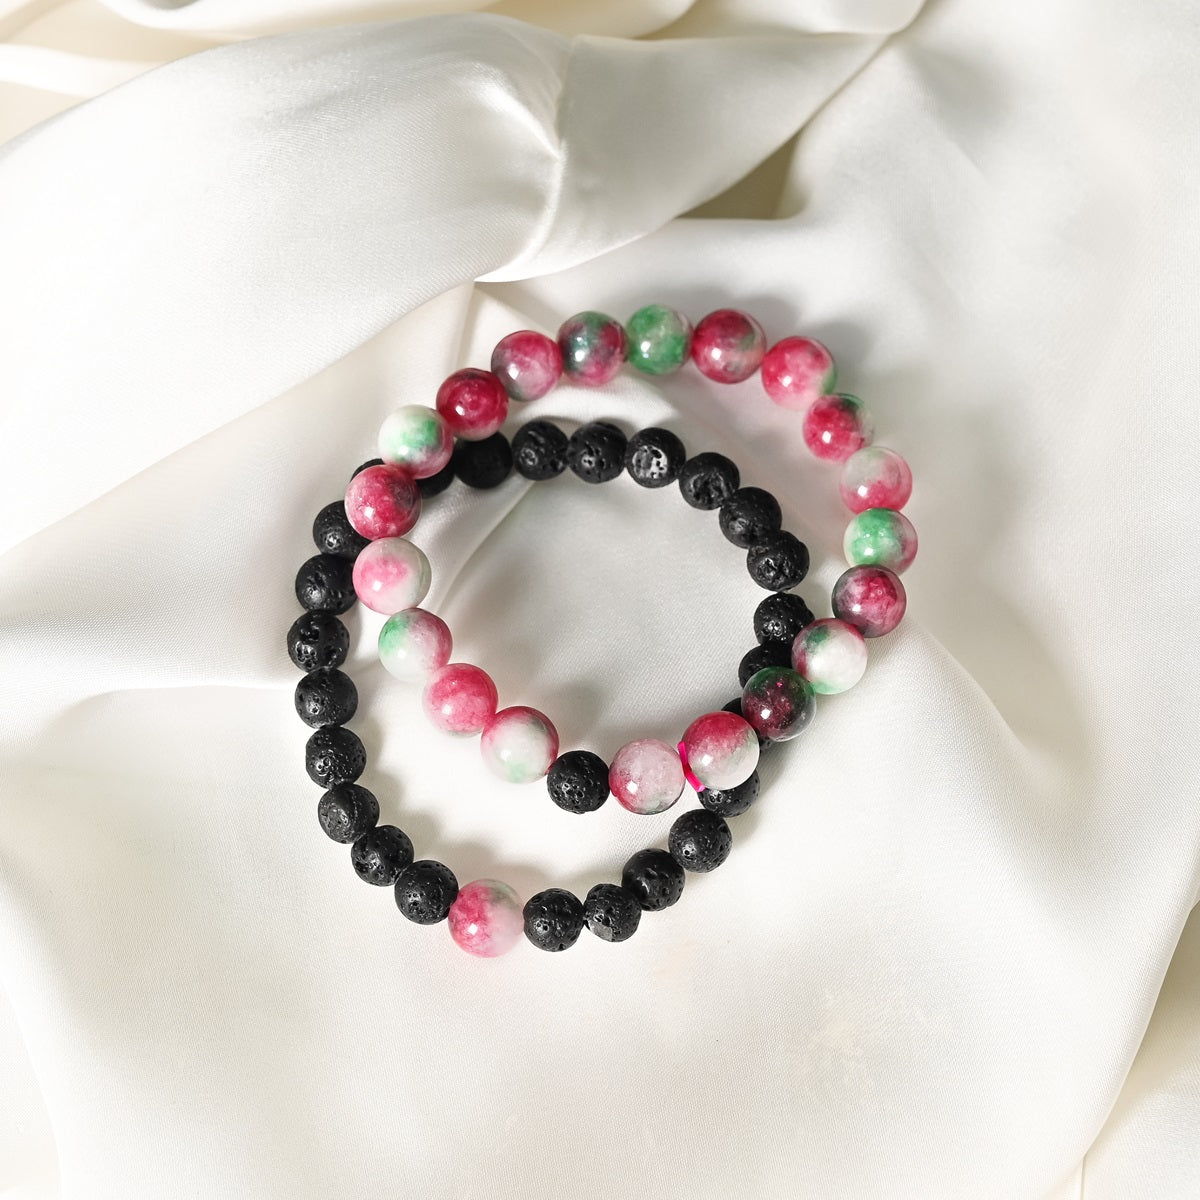 Detailed close-up showcasing the intricate beauty of Watermelon Quartz's smooth round beads and the contrasting black Lava gemstones.